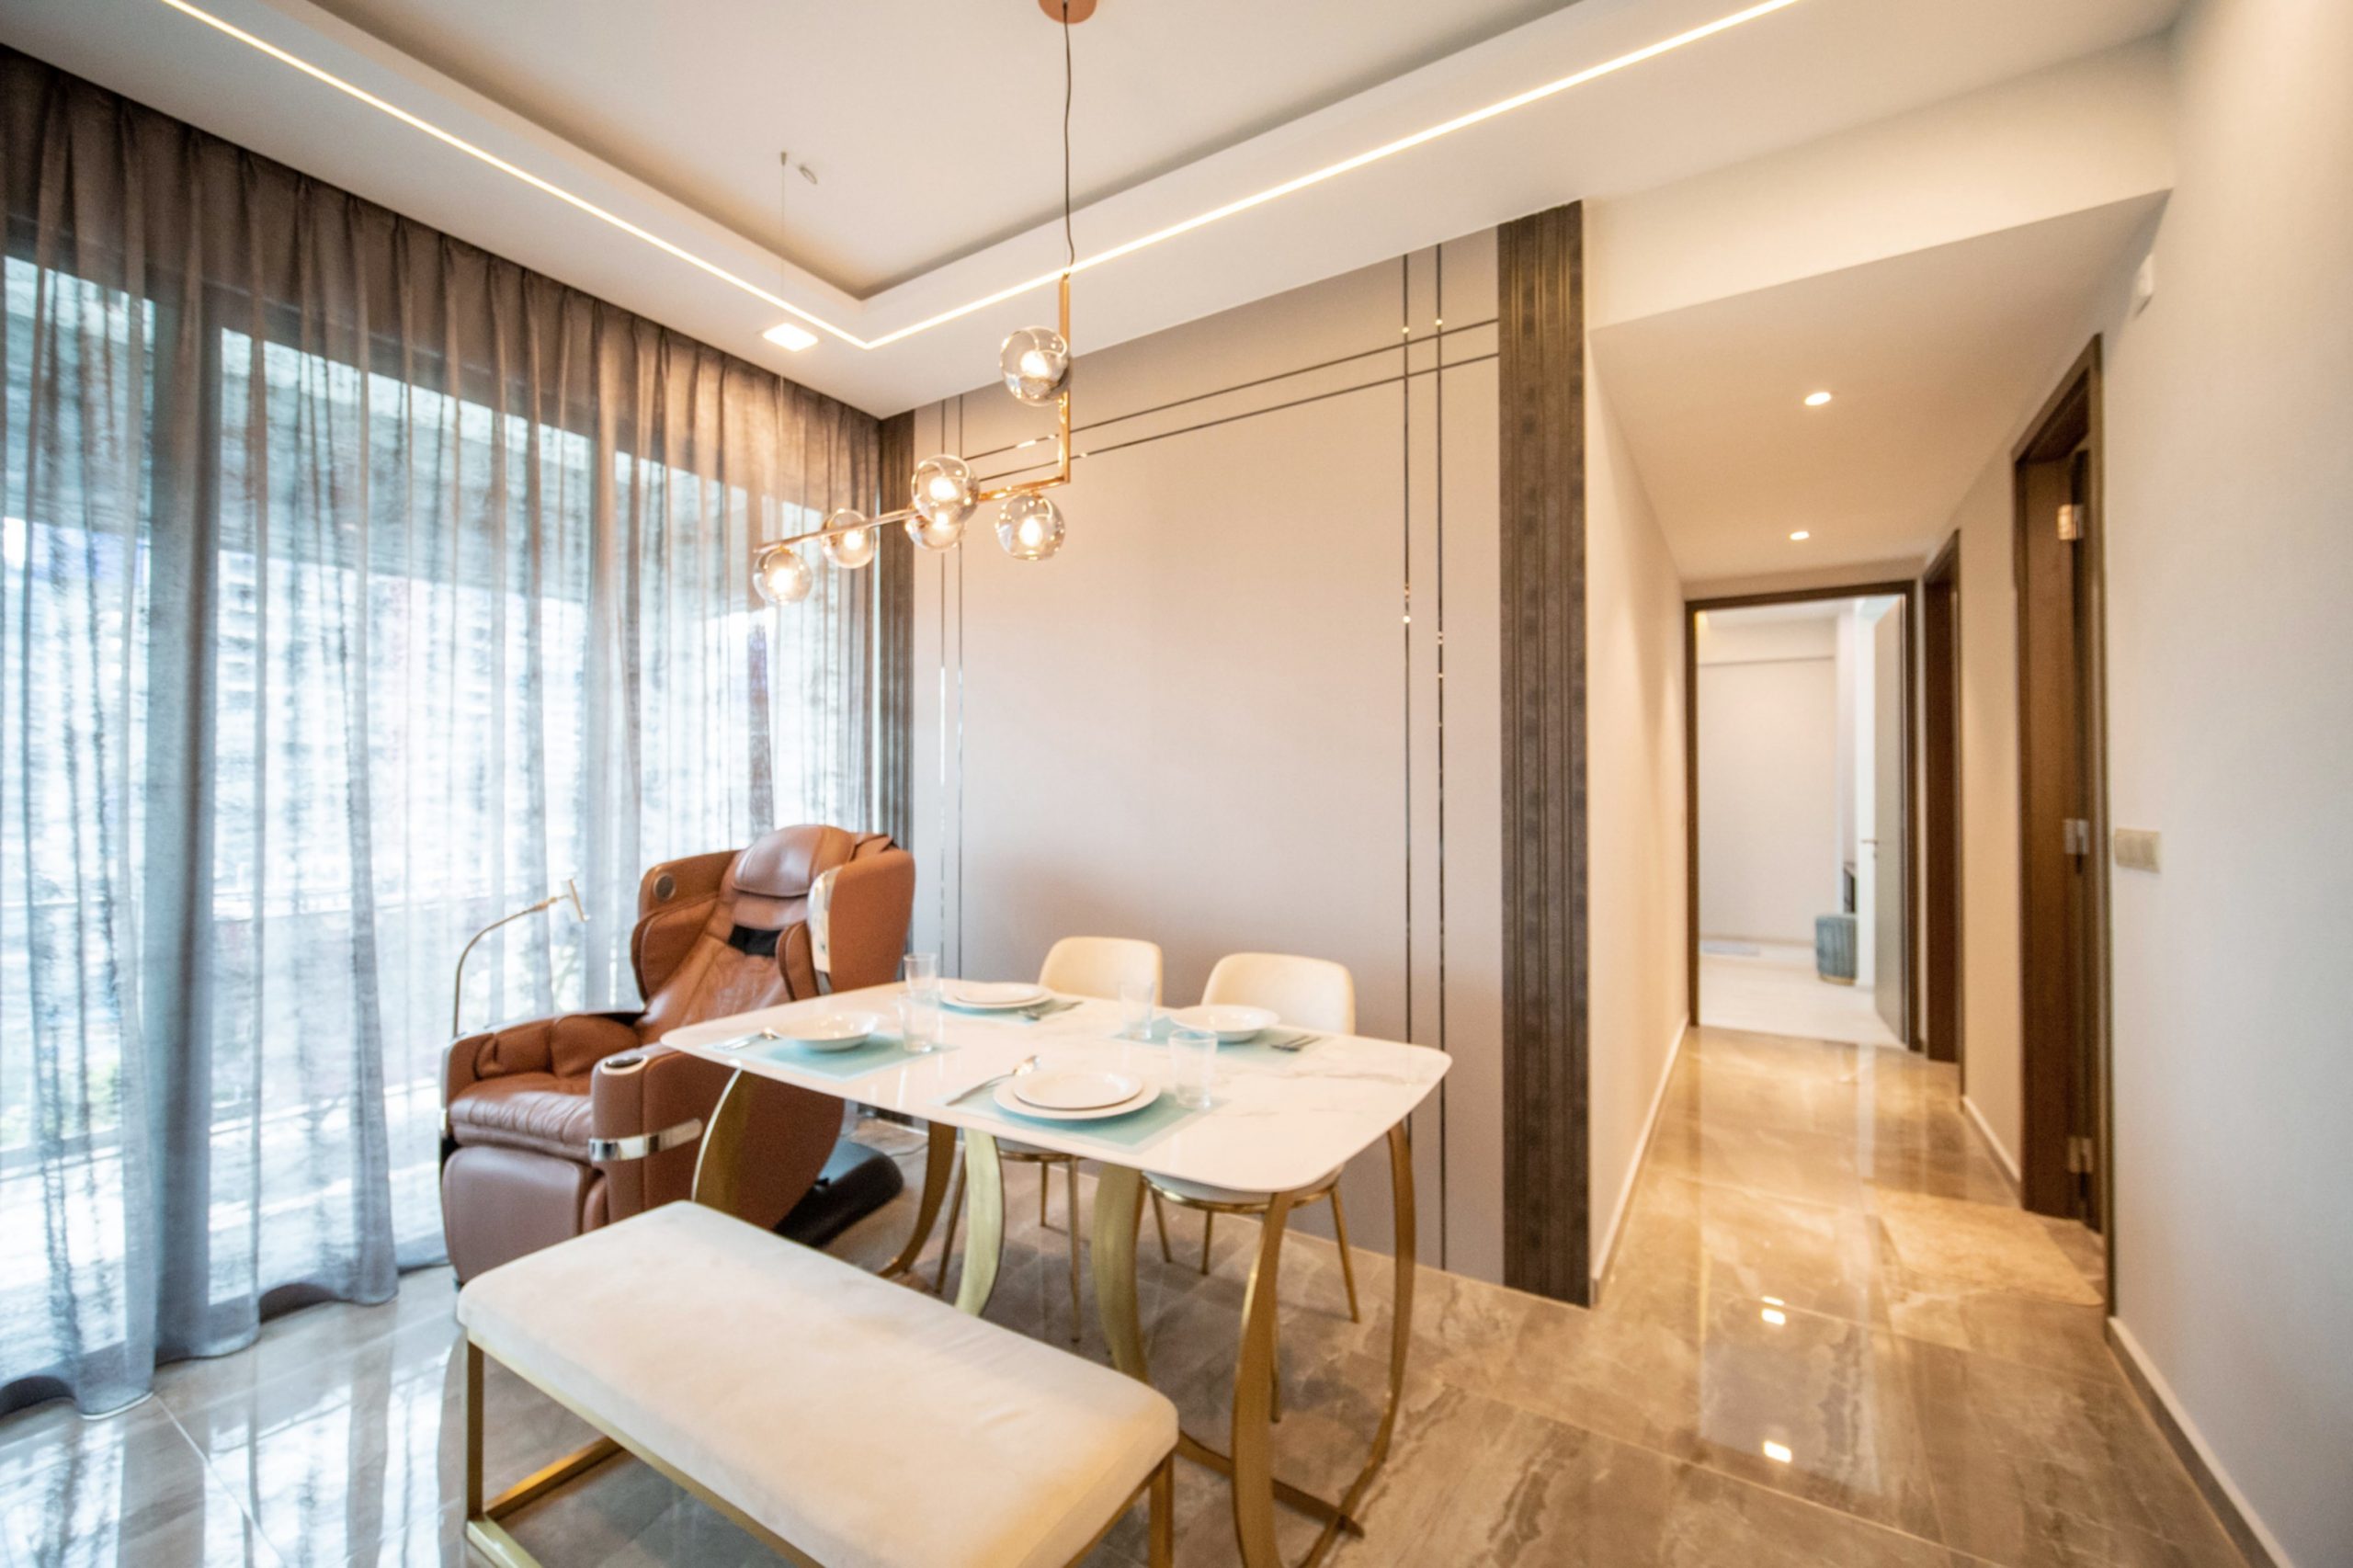 Hundred Trees Condo by Tony Poh and Cathryn Ling